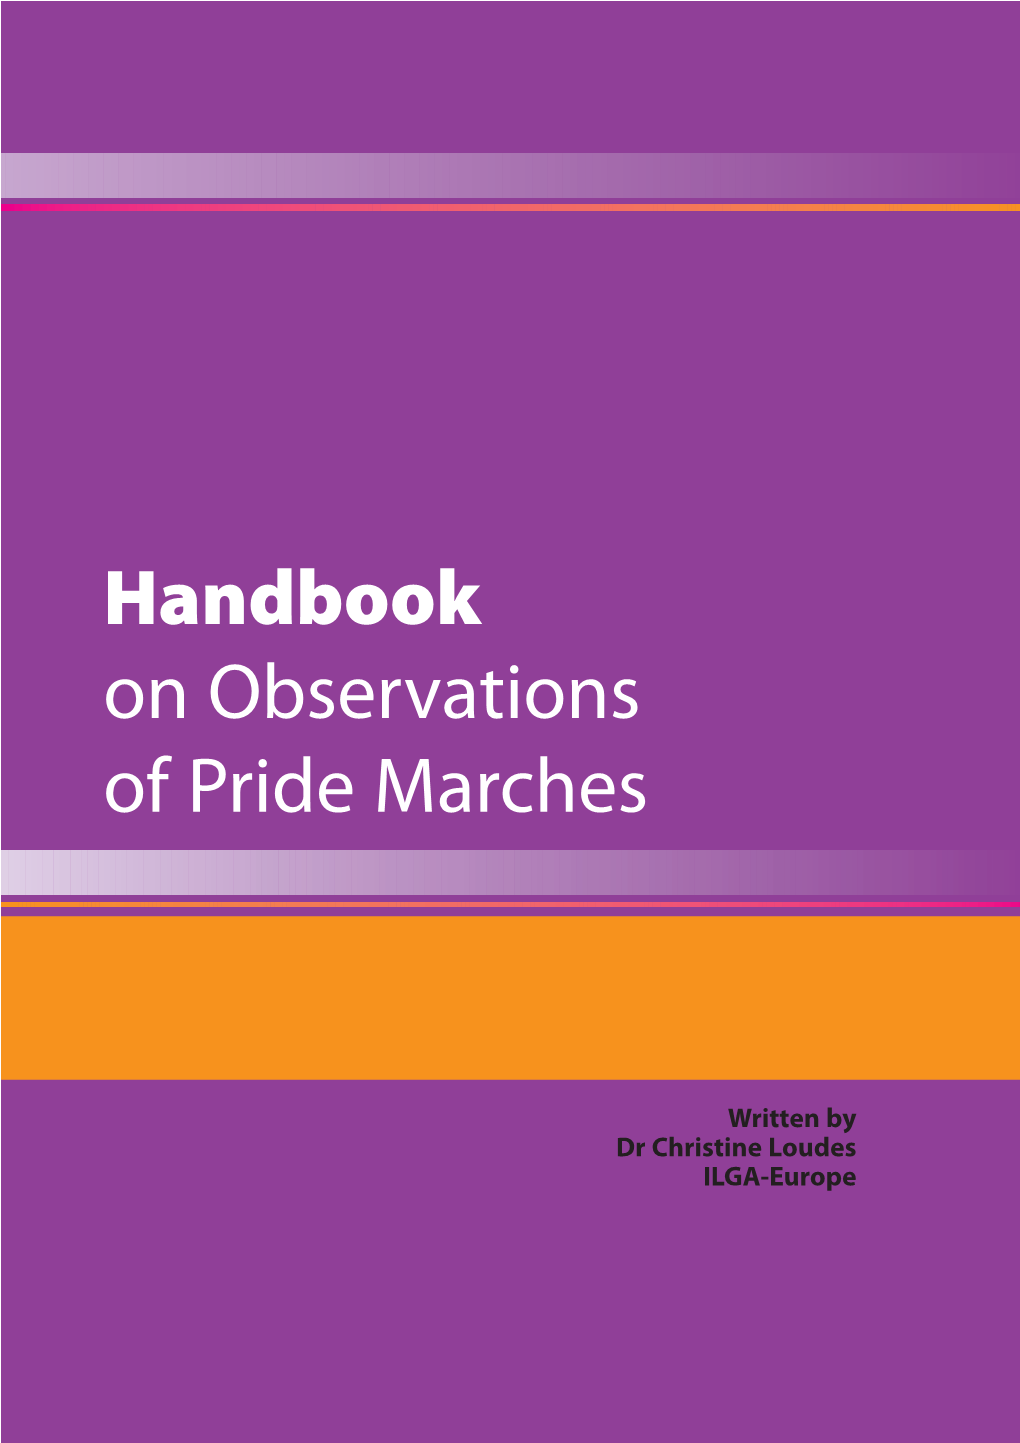 Handbook on Observations of Pride Marches